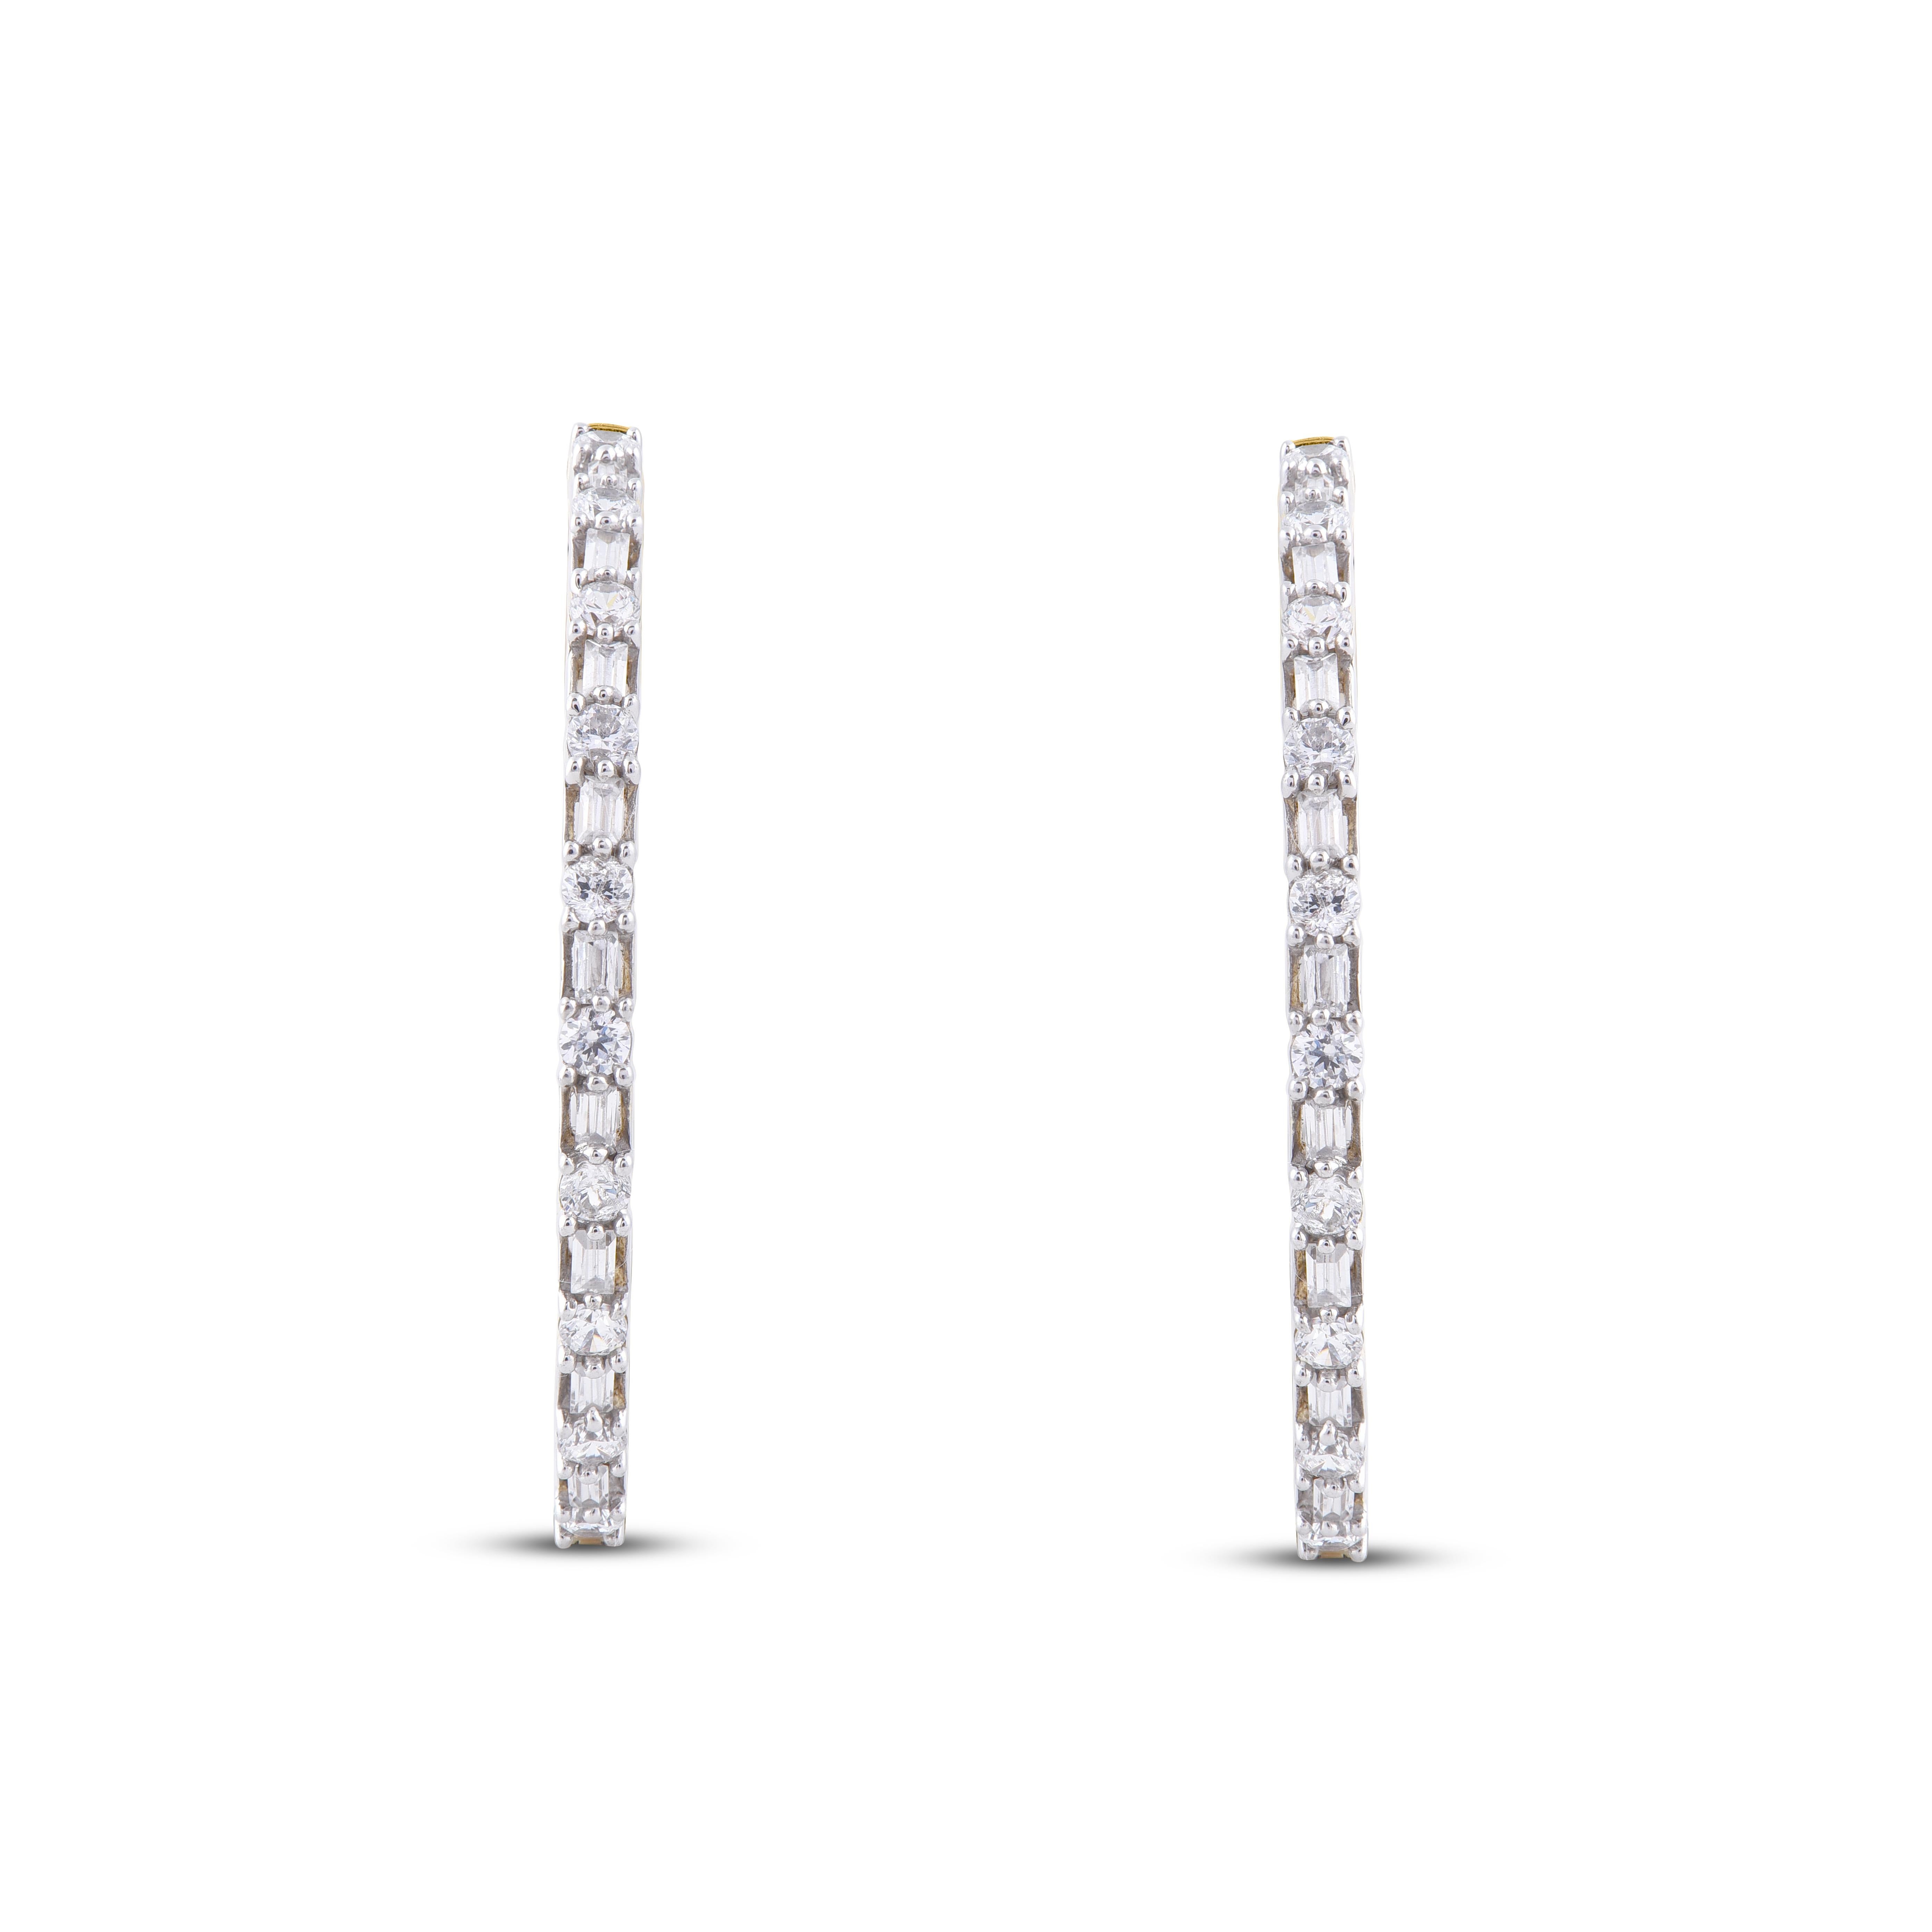 A sophisticated style, these diamond hoop earrings complement her attire. These earrings are done in 14 karat yellow gold with a 64 Baguette and 36 Round diamonds with H-I color I2 clarity.
